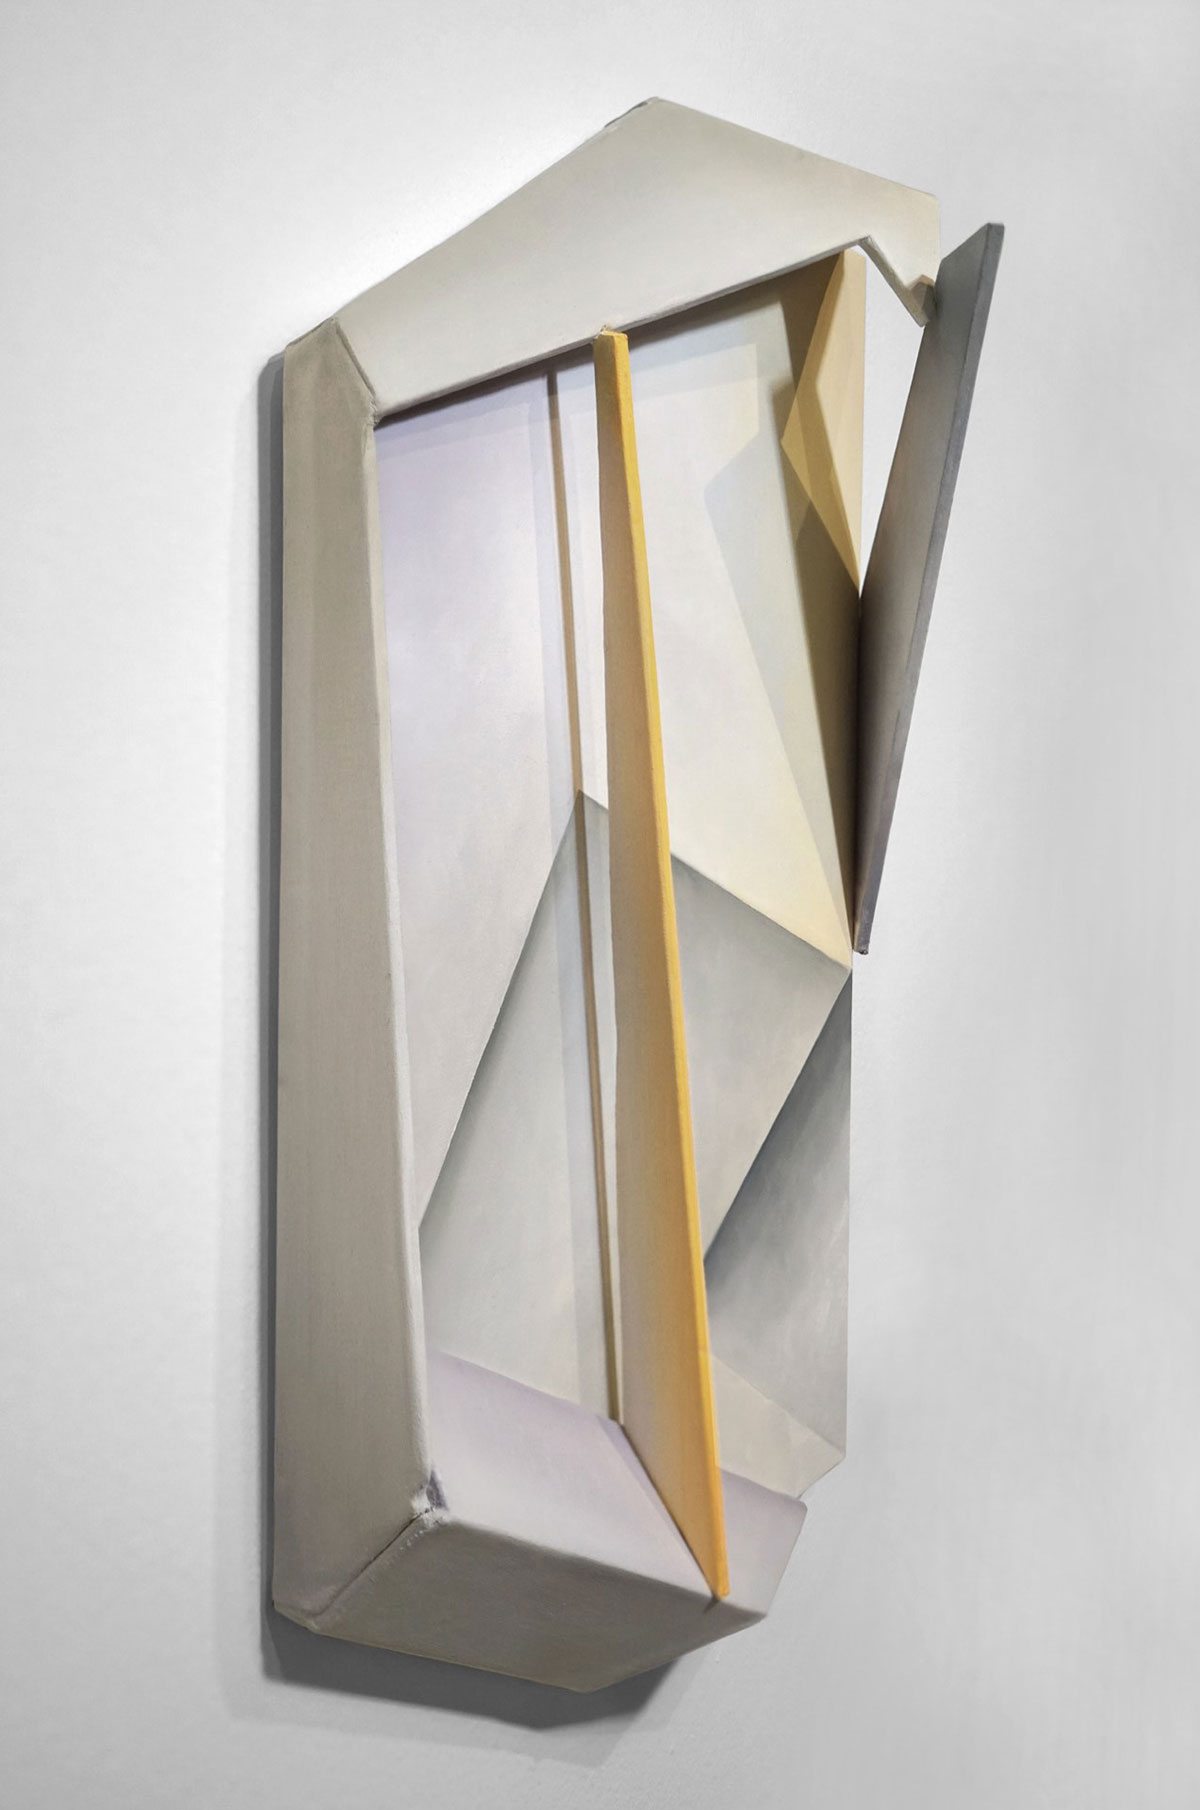 A 3D sculptural artwork with white, gray, and yellow intersecting geometric shapes.